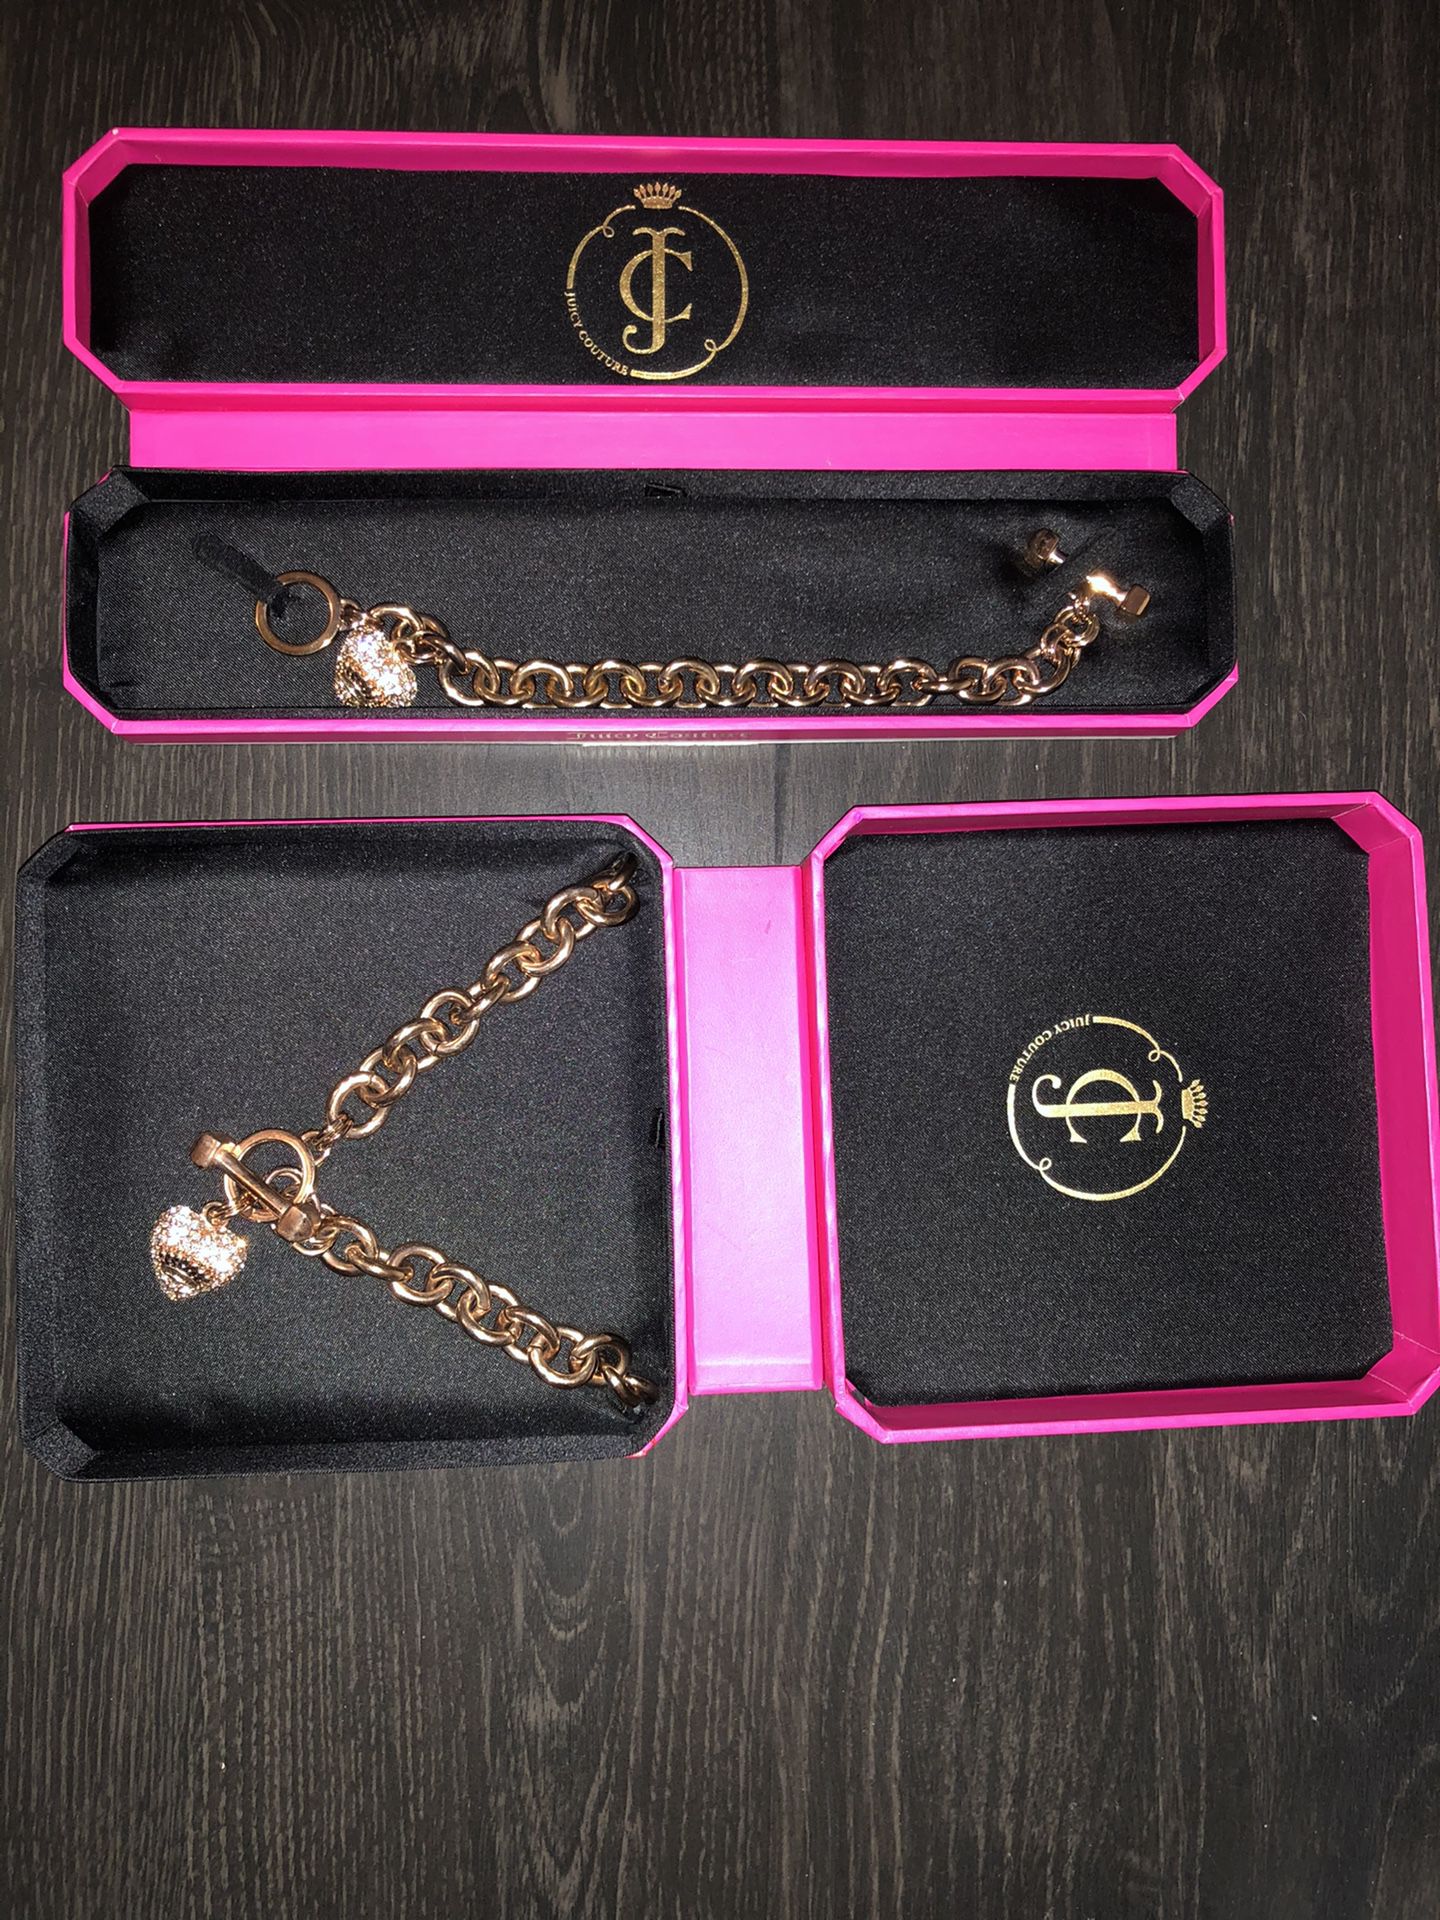 Juicy couture necklace and bracelet